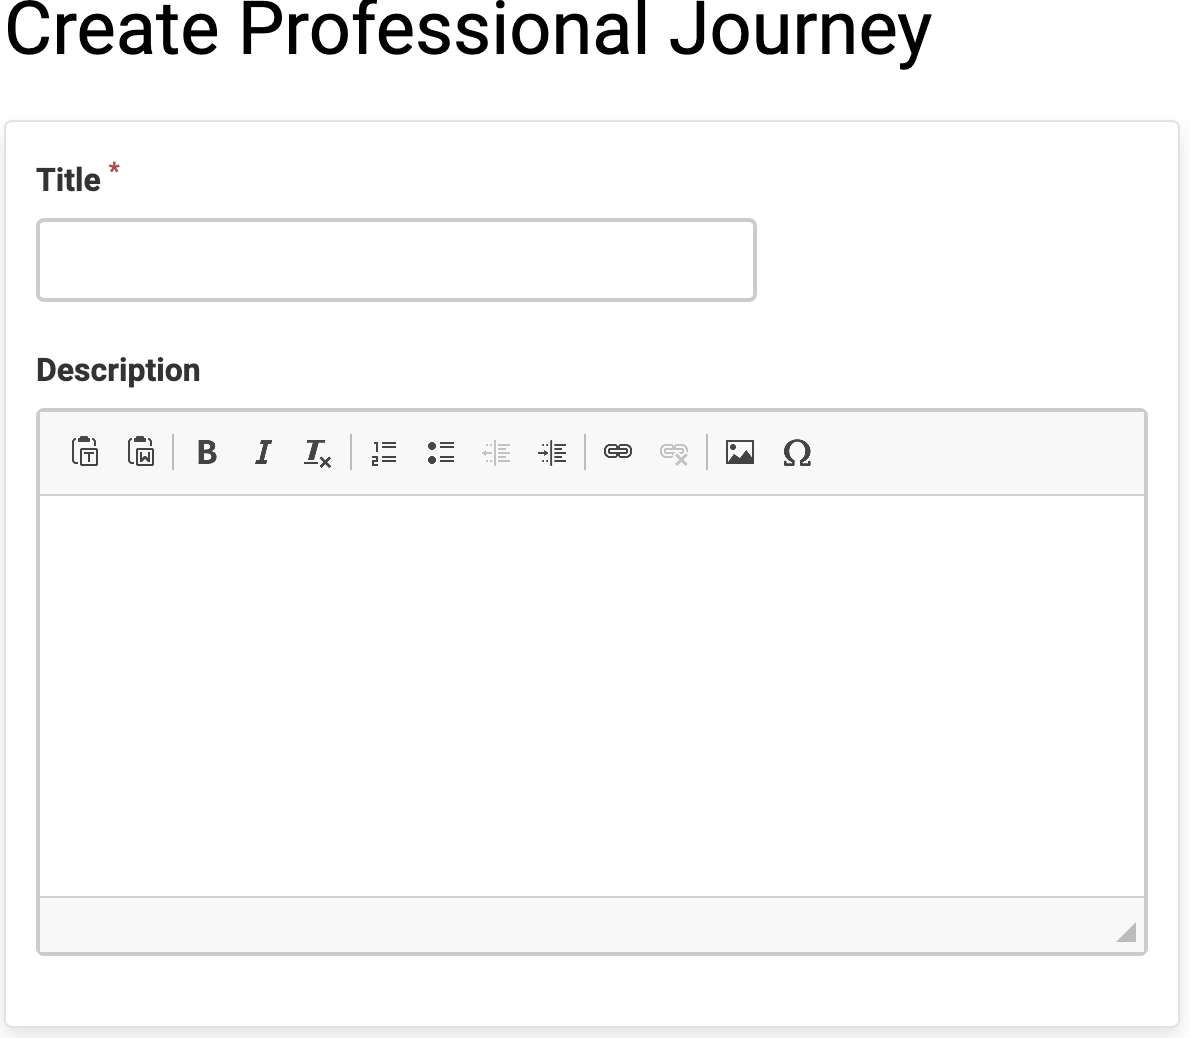 Create Professional Journey section with Title and Description field below